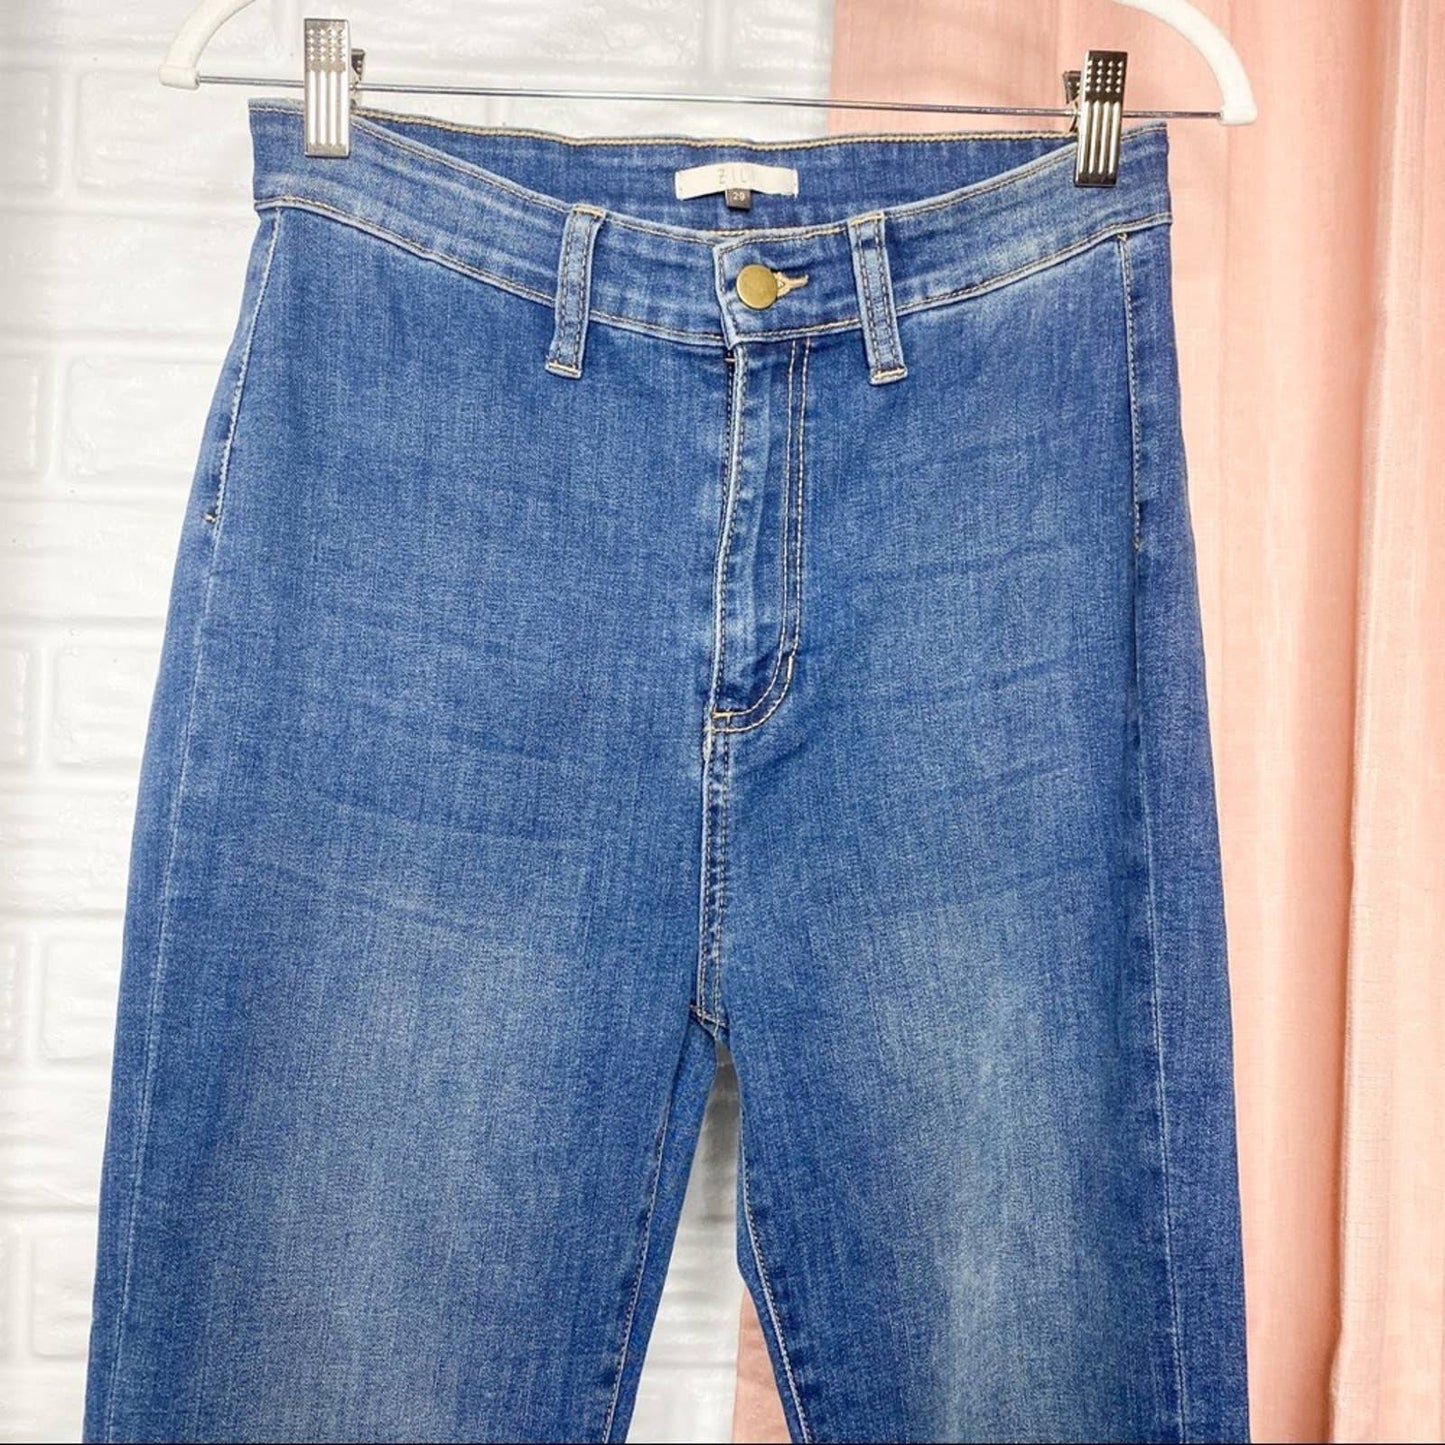 Three Daughters Ranch Boutique Zili High Waisted Flare Jeans Size 29